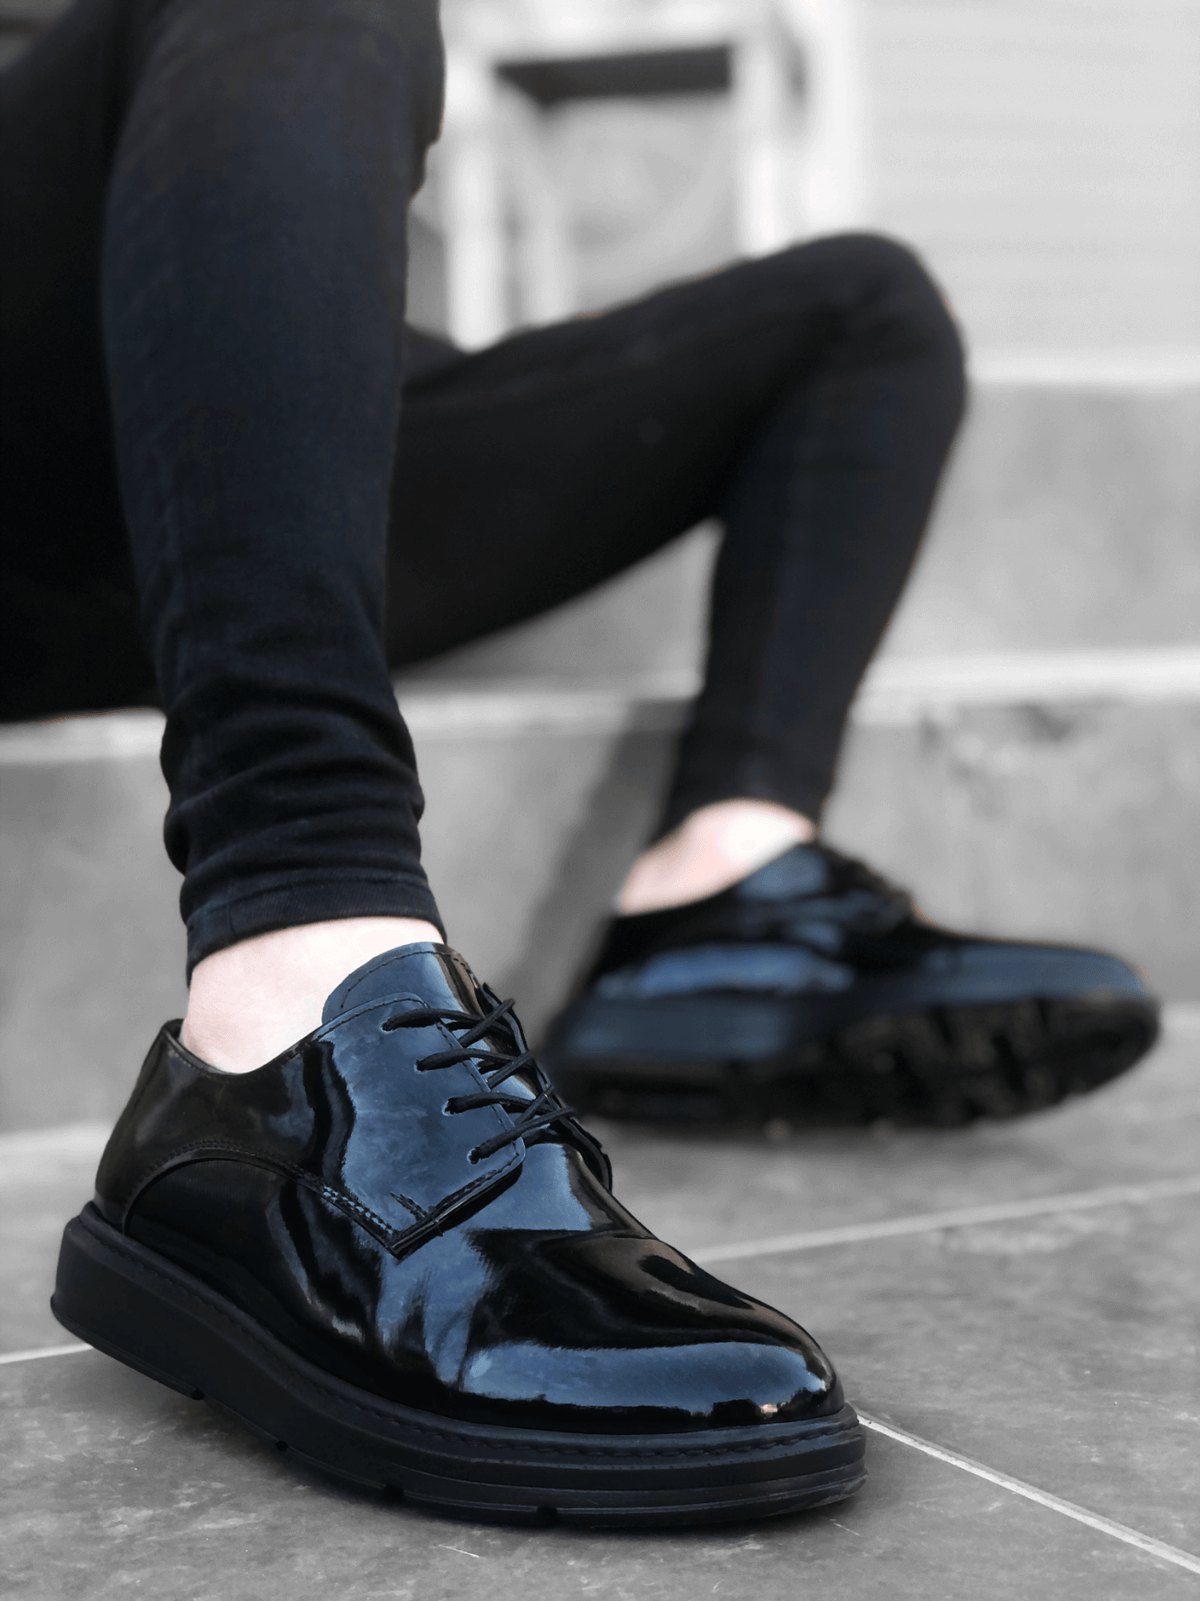 BA0003 Lace-Up Classic Spor Black and Black Thick Sole Casual Men Shoes - STREETMODE ™